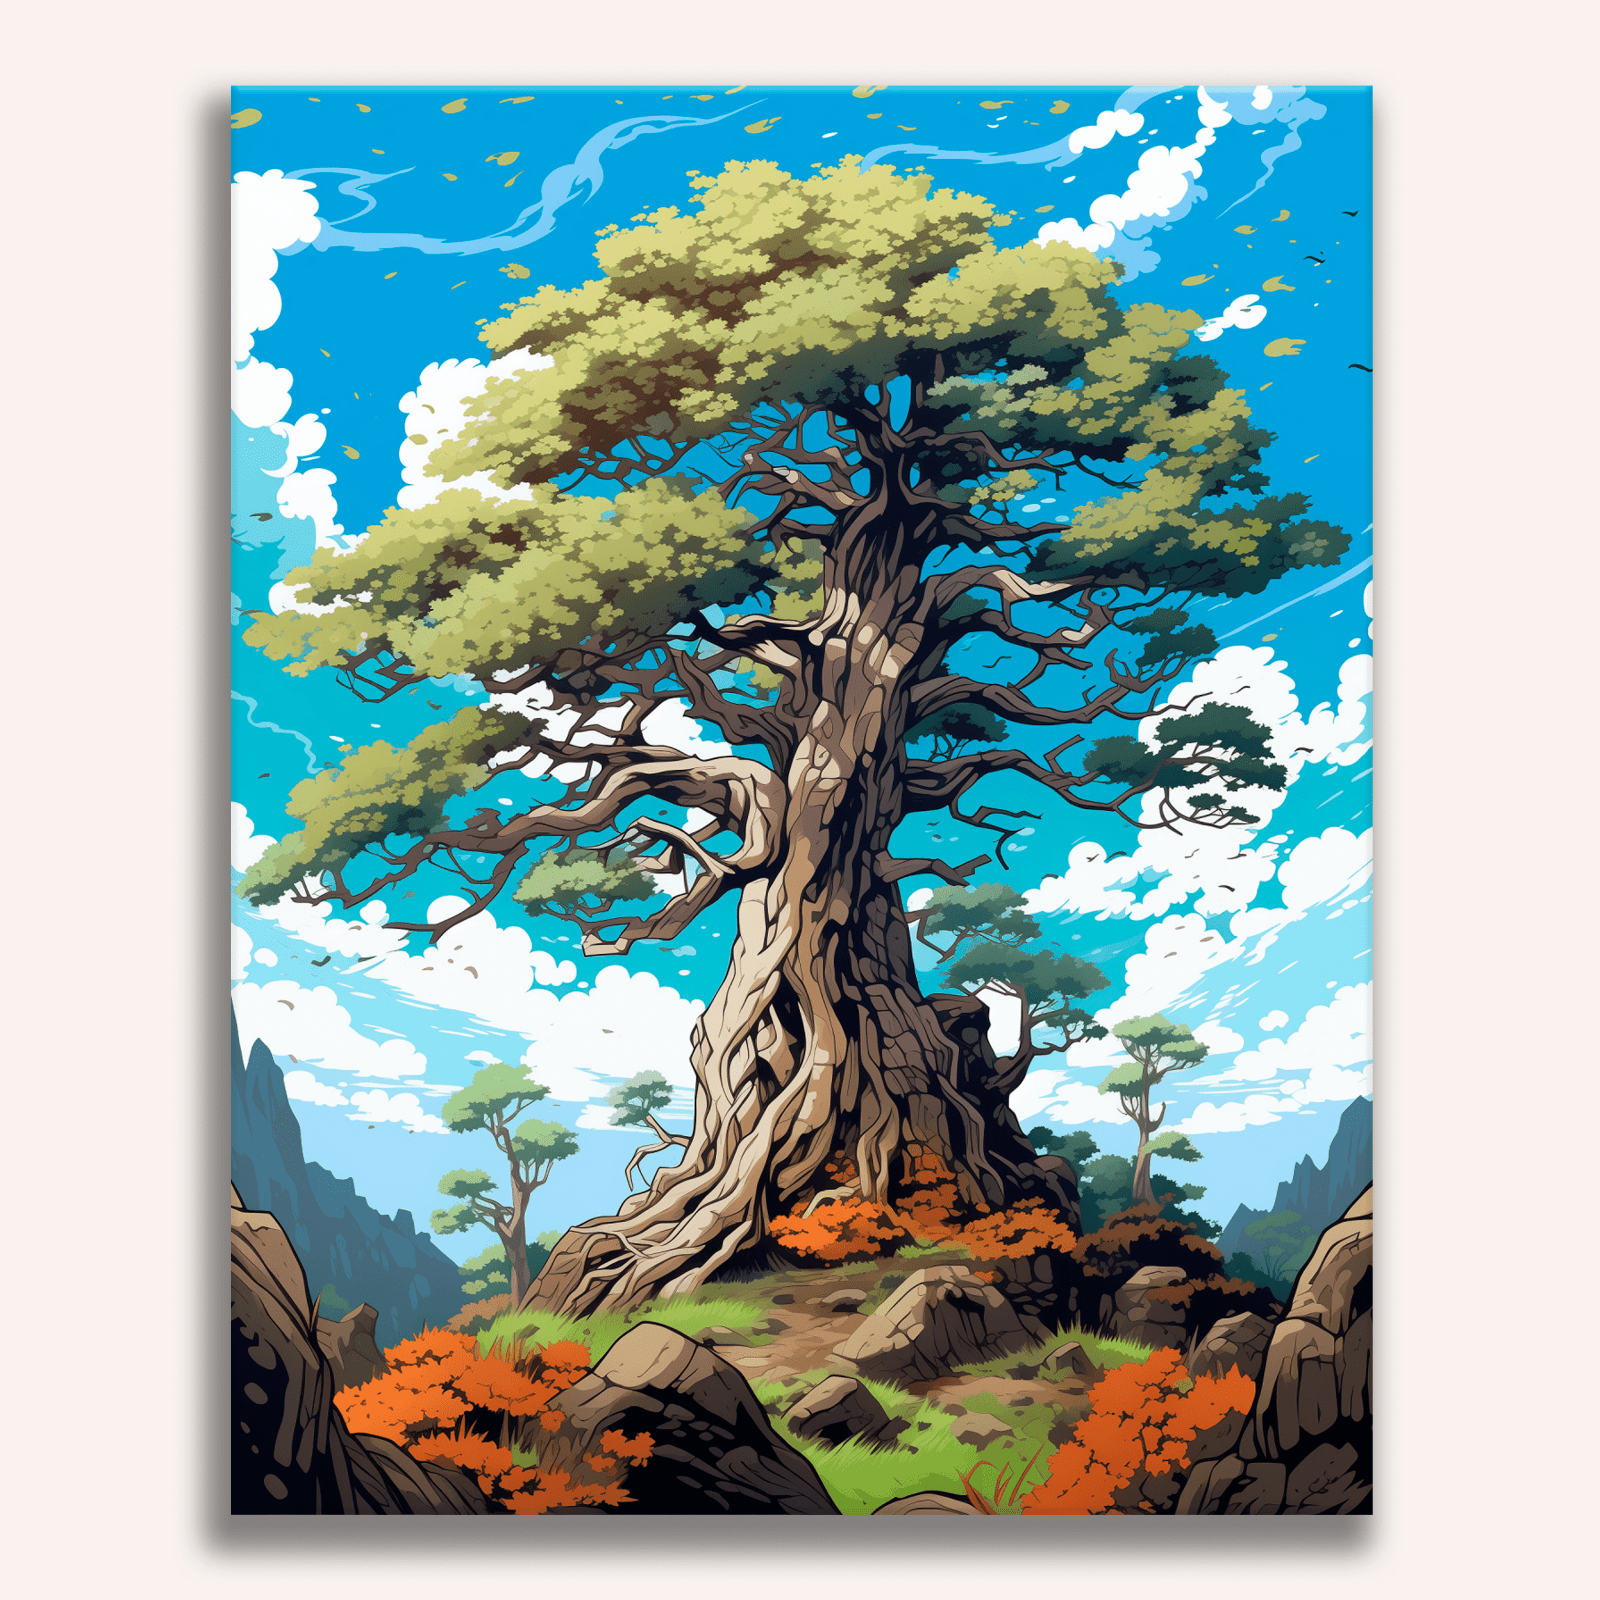 The Wisest Tree - Number Artist Paint by Numbers Kits